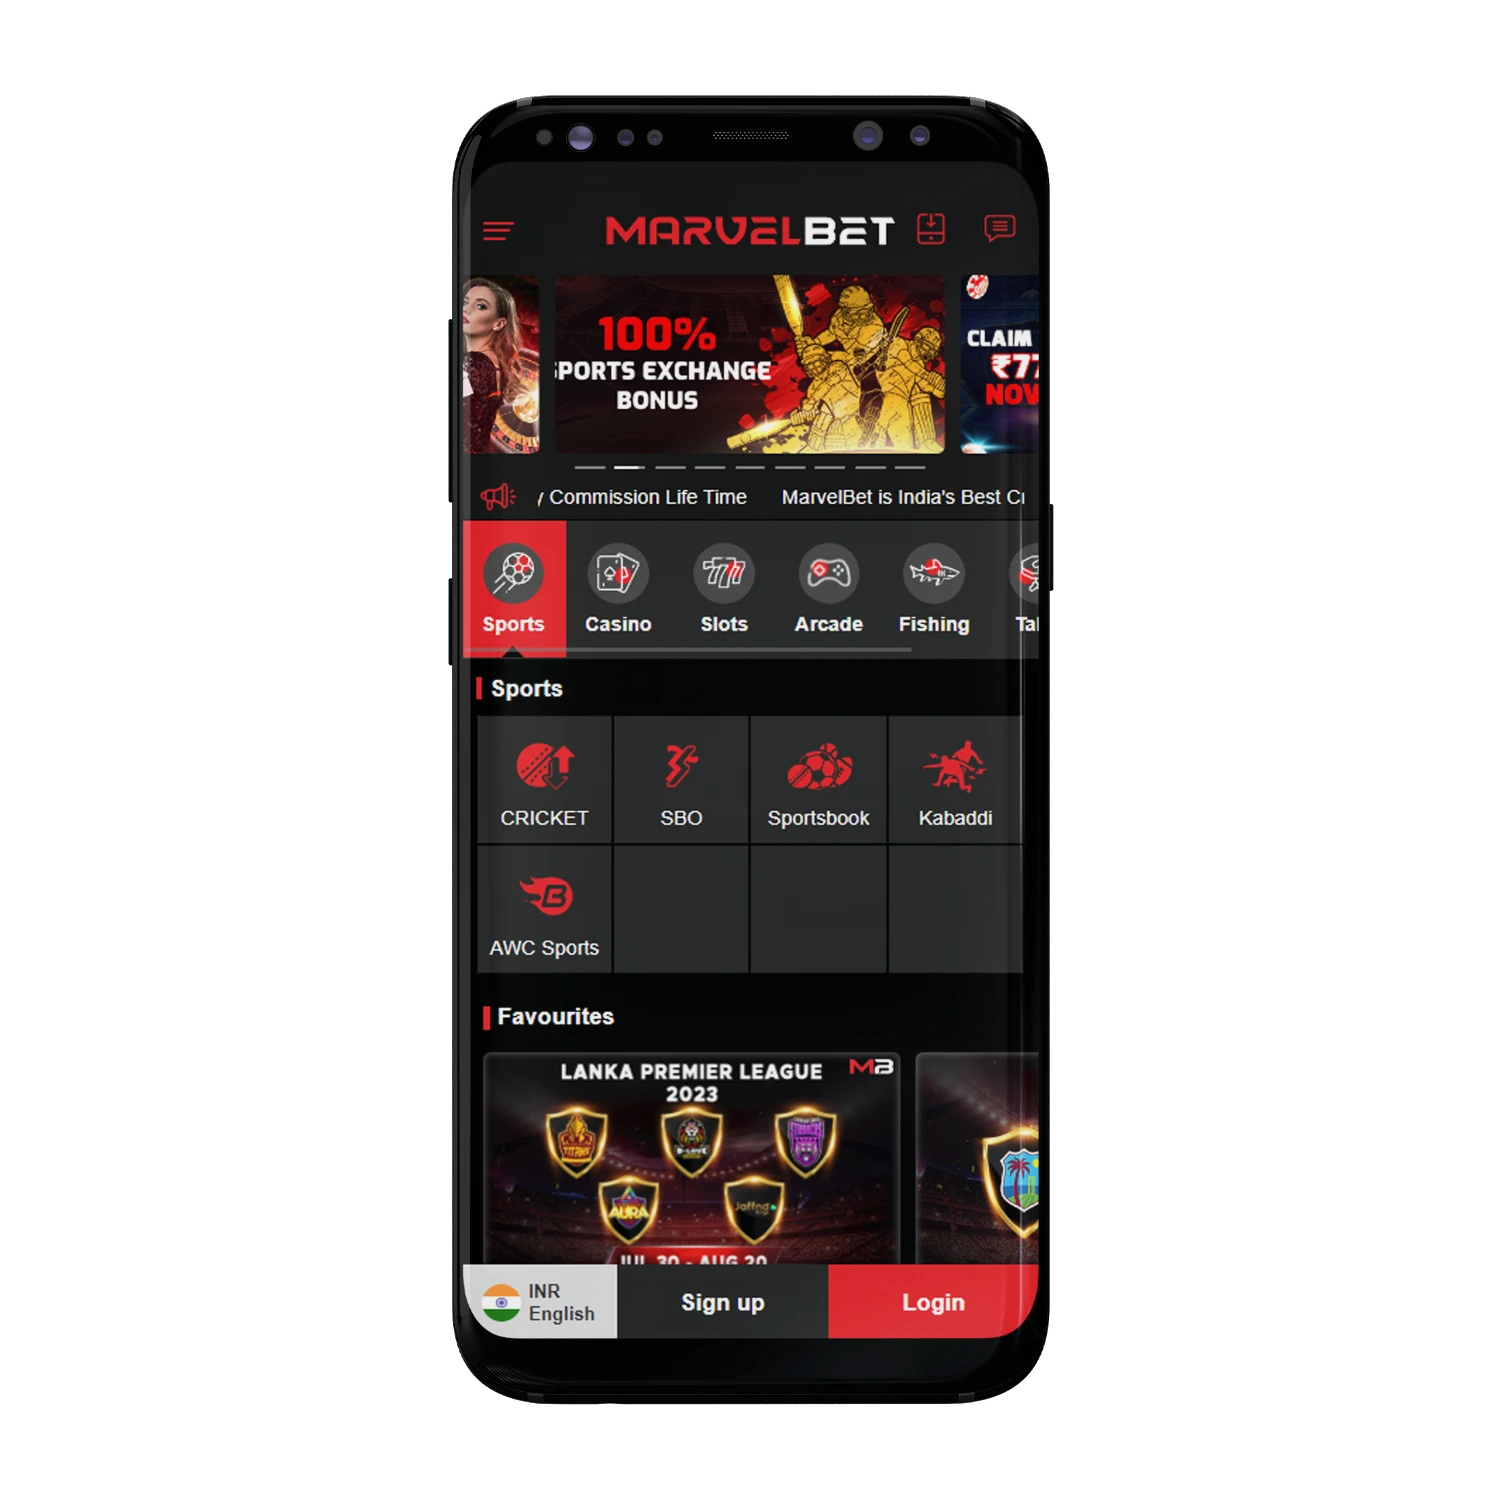 Marvelbet developed a well-optimized app for Android and iOS devices.